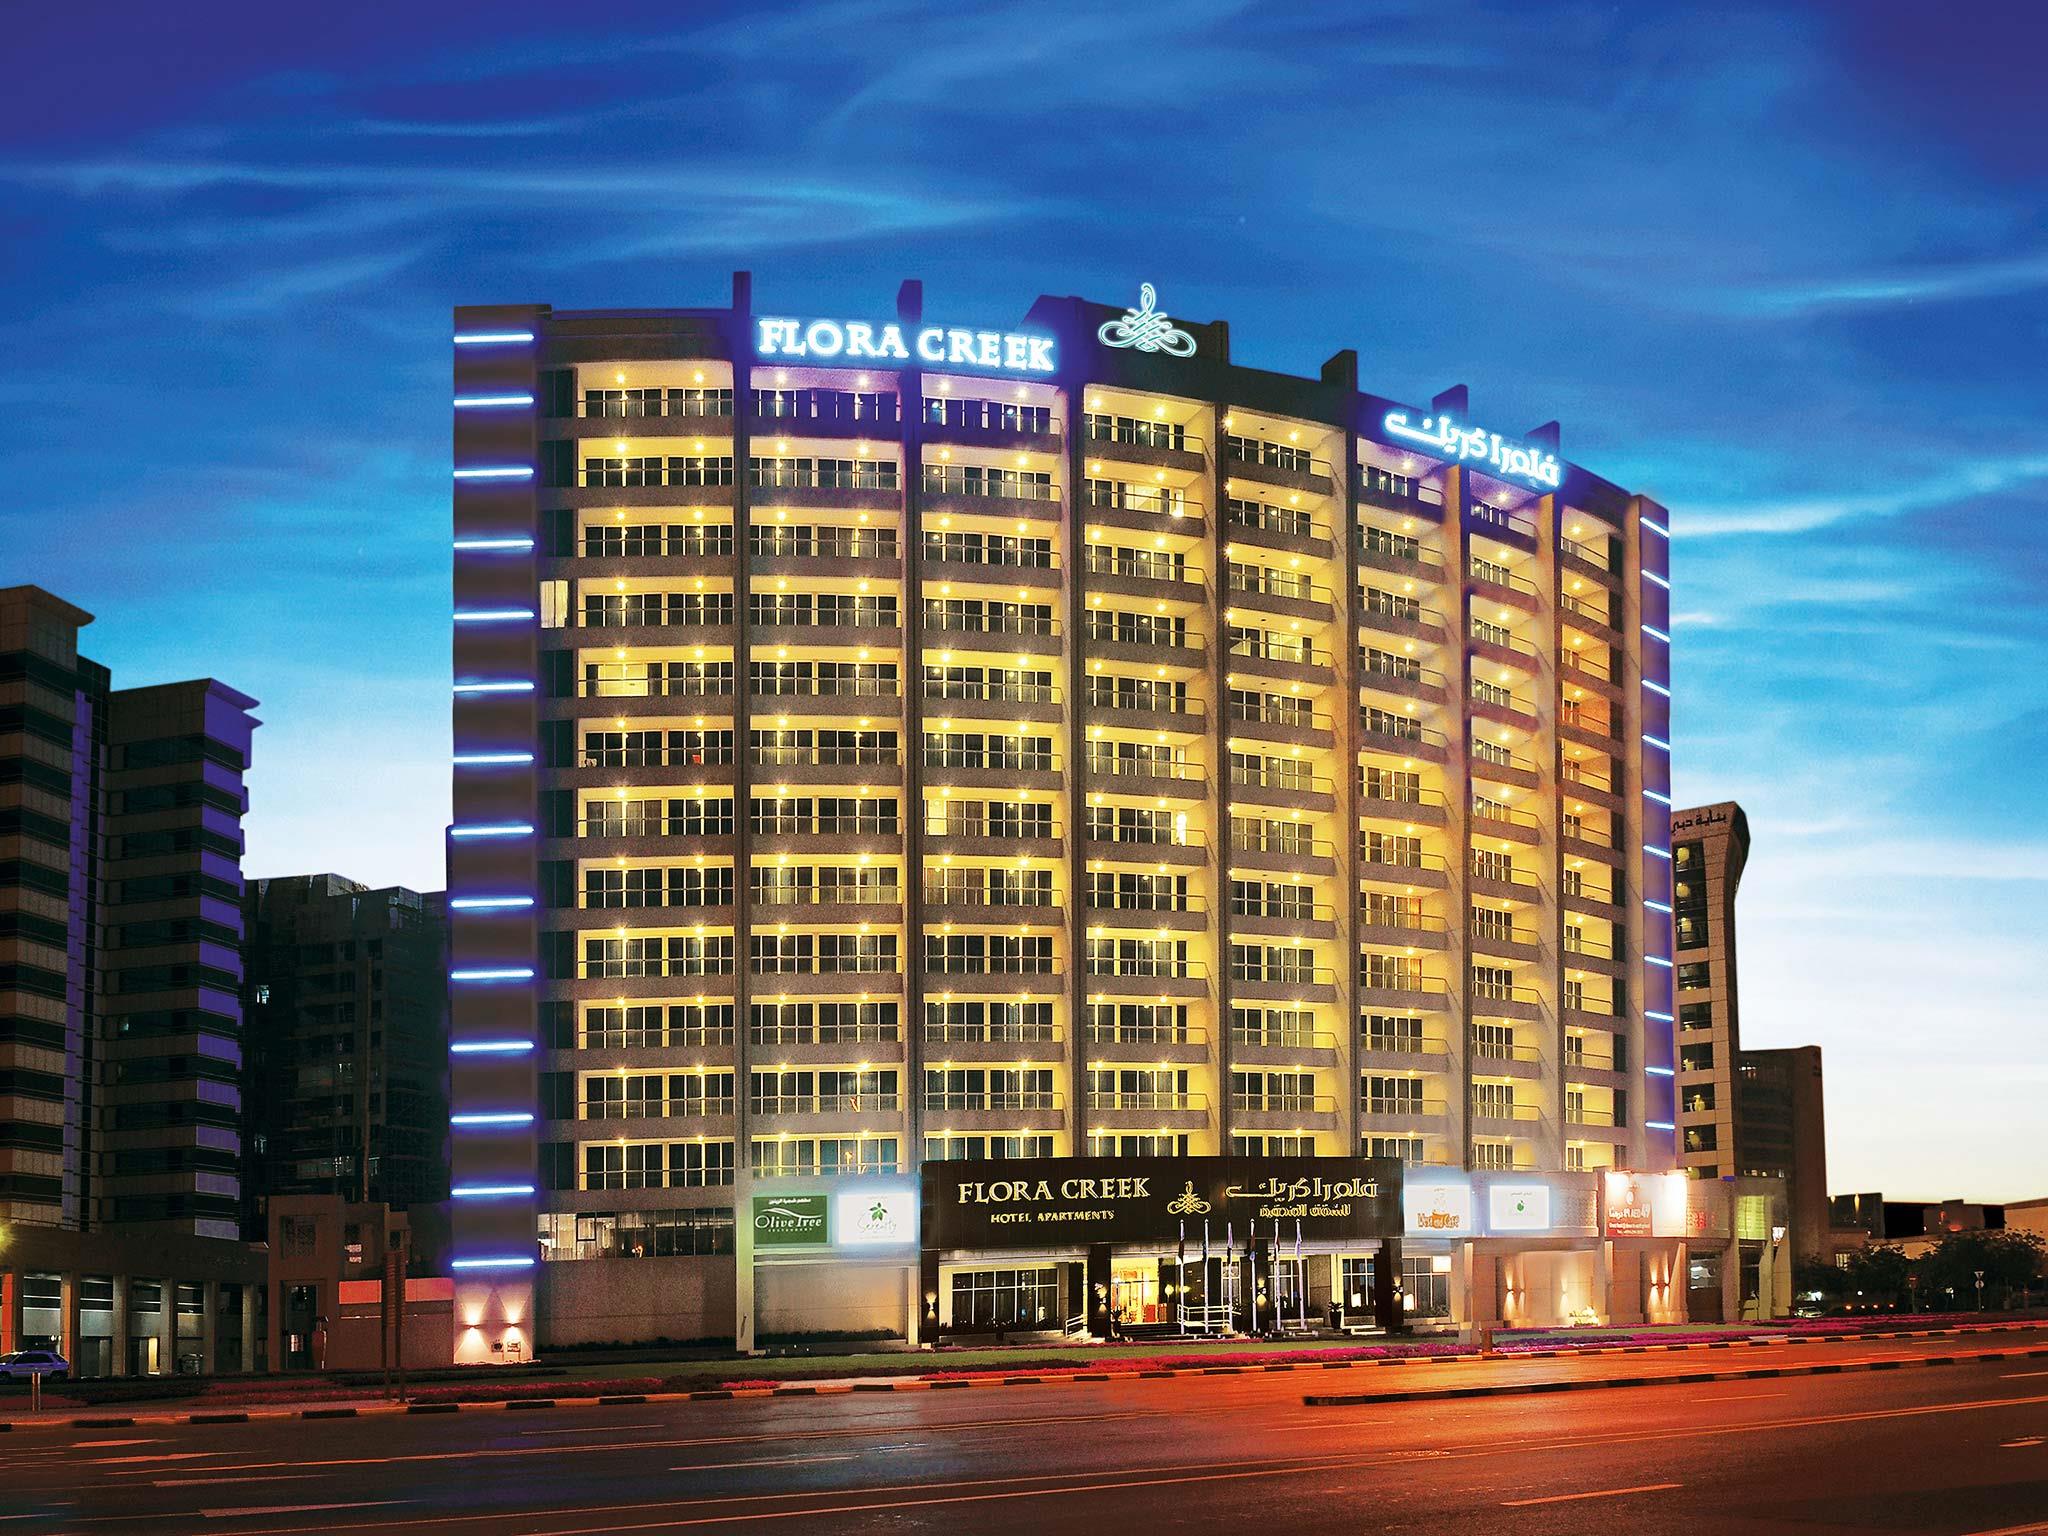 Flora Creek Deluxe Hotel Apartments Emirate of Dubai FAQ 2016, What facilities are there in Flora Creek Deluxe Hotel Apartments Emirate of Dubai 2016, What Languages Spoken are Supported in Flora Creek Deluxe Hotel Apartments Emirate of Dubai 2016, Which payment cards are accepted in Flora Creek Deluxe Hotel Apartments Emirate of Dubai , Emirate of Dubai Flora Creek Deluxe Hotel Apartments room facilities and services Q&A 2016, Emirate of Dubai Flora Creek Deluxe Hotel Apartments online booking services 2016, Emirate of Dubai Flora Creek Deluxe Hotel Apartments address 2016, Emirate of Dubai Flora Creek Deluxe Hotel Apartments telephone number 2016,Emirate of Dubai Flora Creek Deluxe Hotel Apartments map 2016, Emirate of Dubai Flora Creek Deluxe Hotel Apartments traffic guide 2016, how to go Emirate of Dubai Flora Creek Deluxe Hotel Apartments, Emirate of Dubai Flora Creek Deluxe Hotel Apartments booking online 2016, Emirate of Dubai Flora Creek Deluxe Hotel Apartments room types 2016.